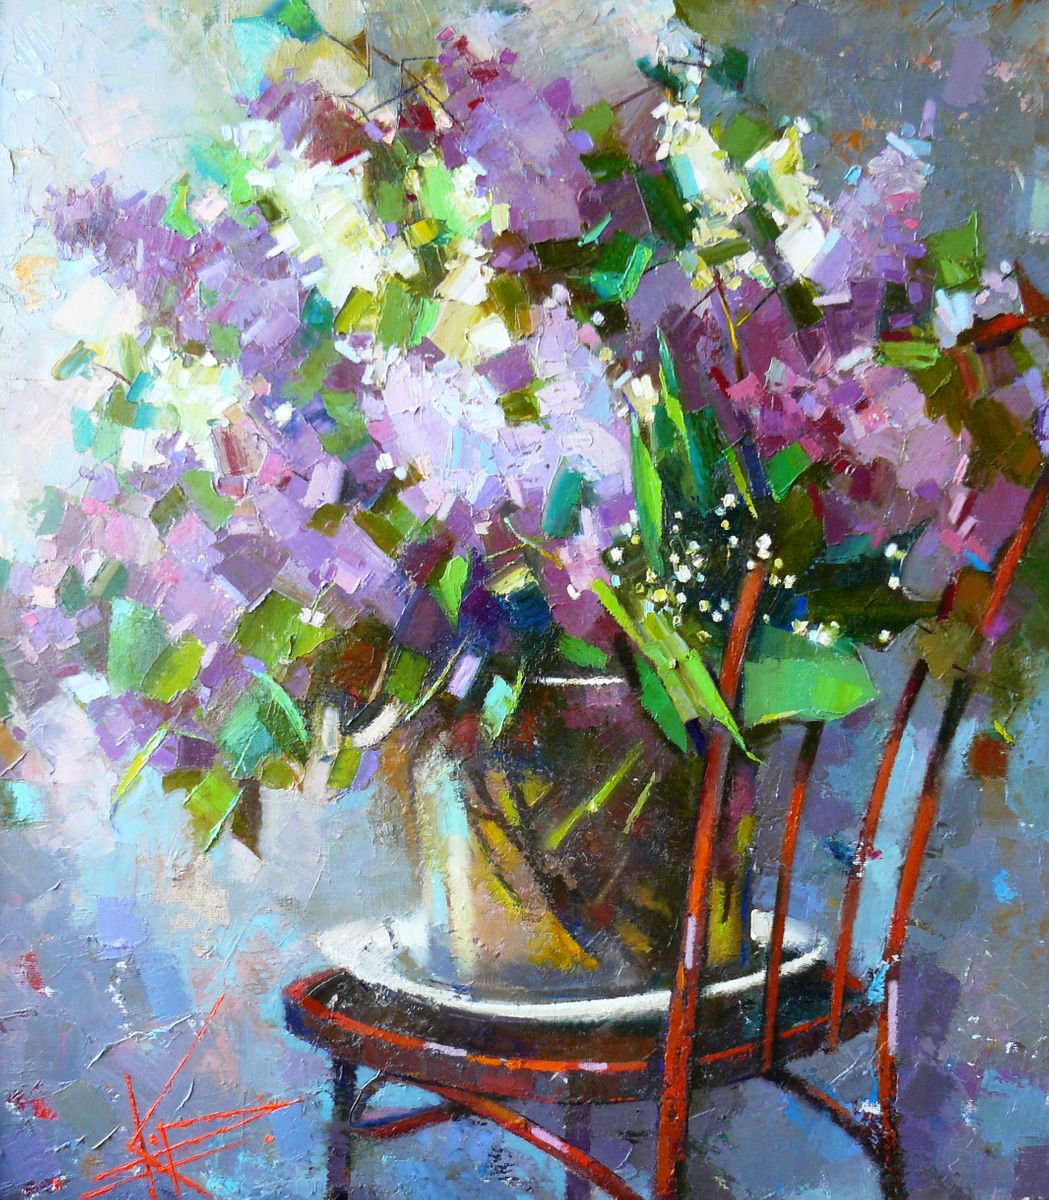 Lilacs and lilies of the valley by Oksana Kornienko